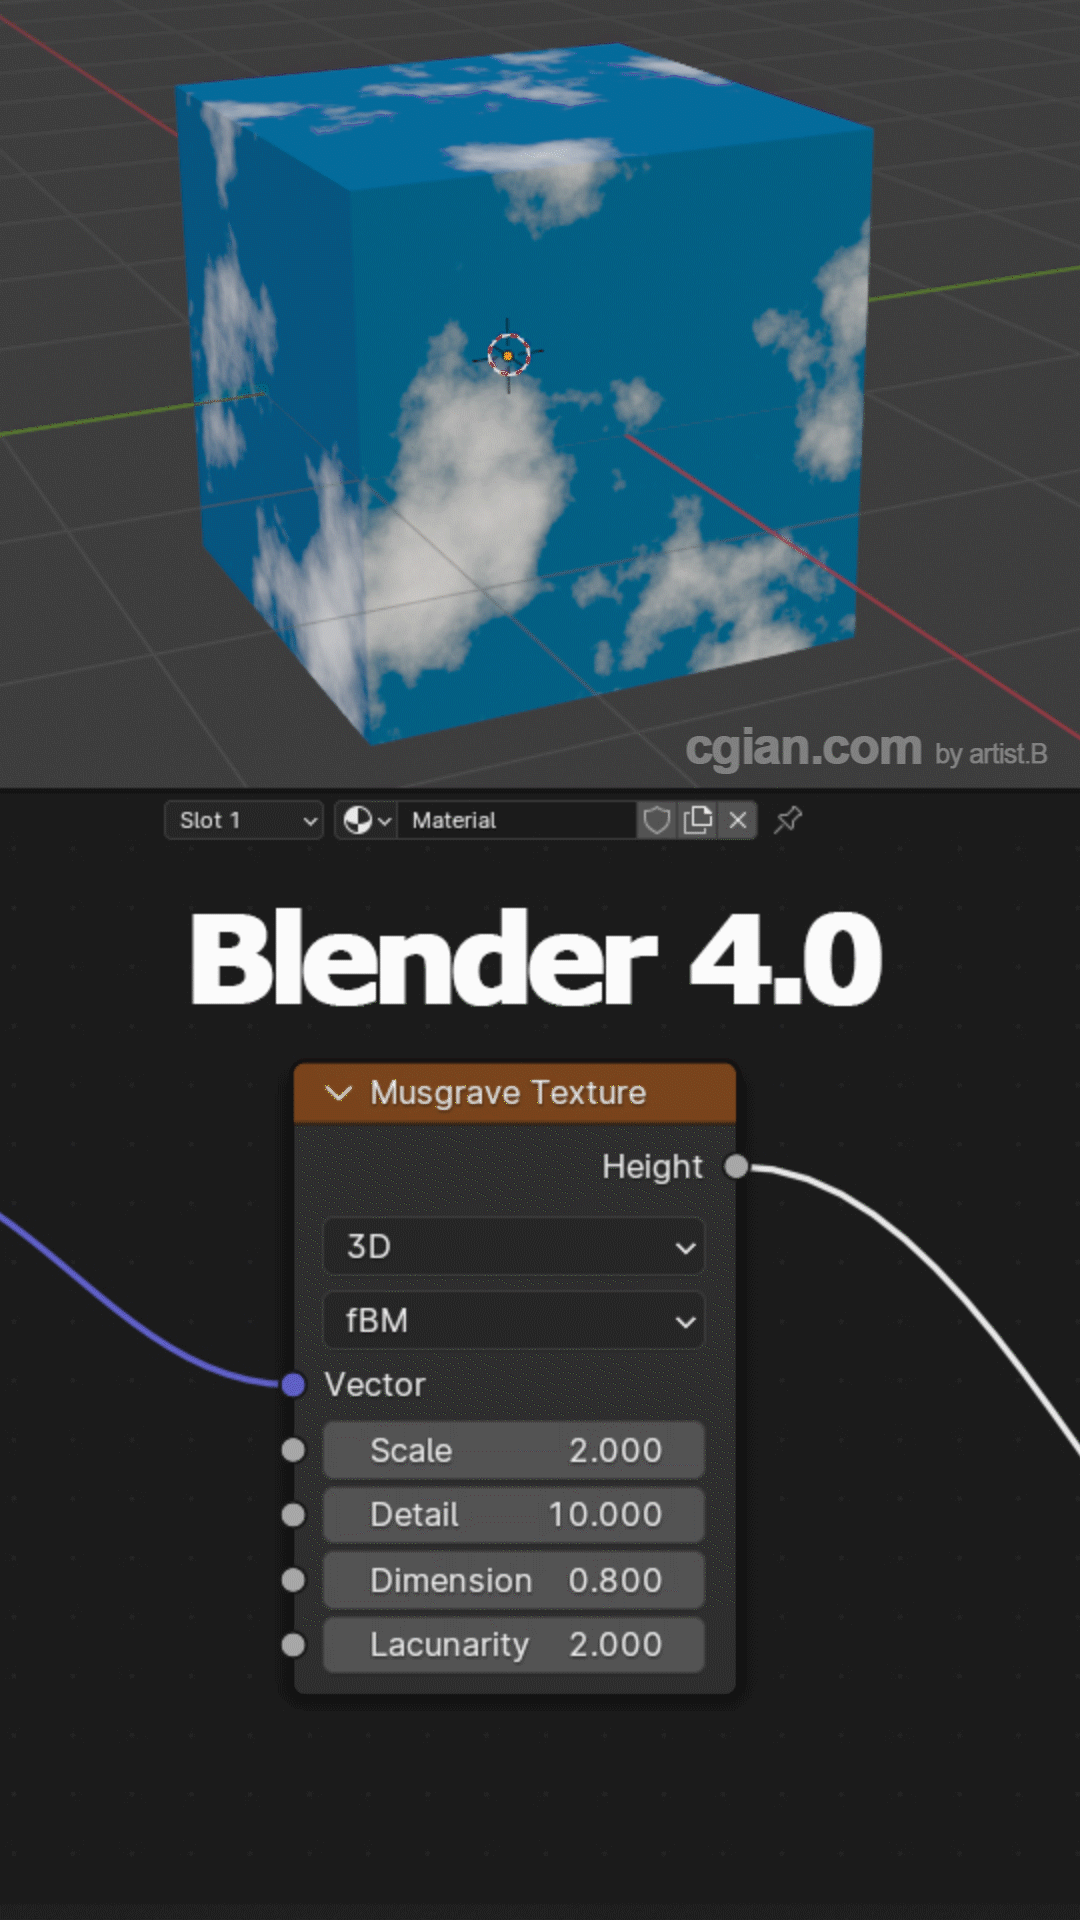 Musgrave Texture is replaced by Noise Texture in Blender 4.1 3d b3d blender cgian material texture tutorial